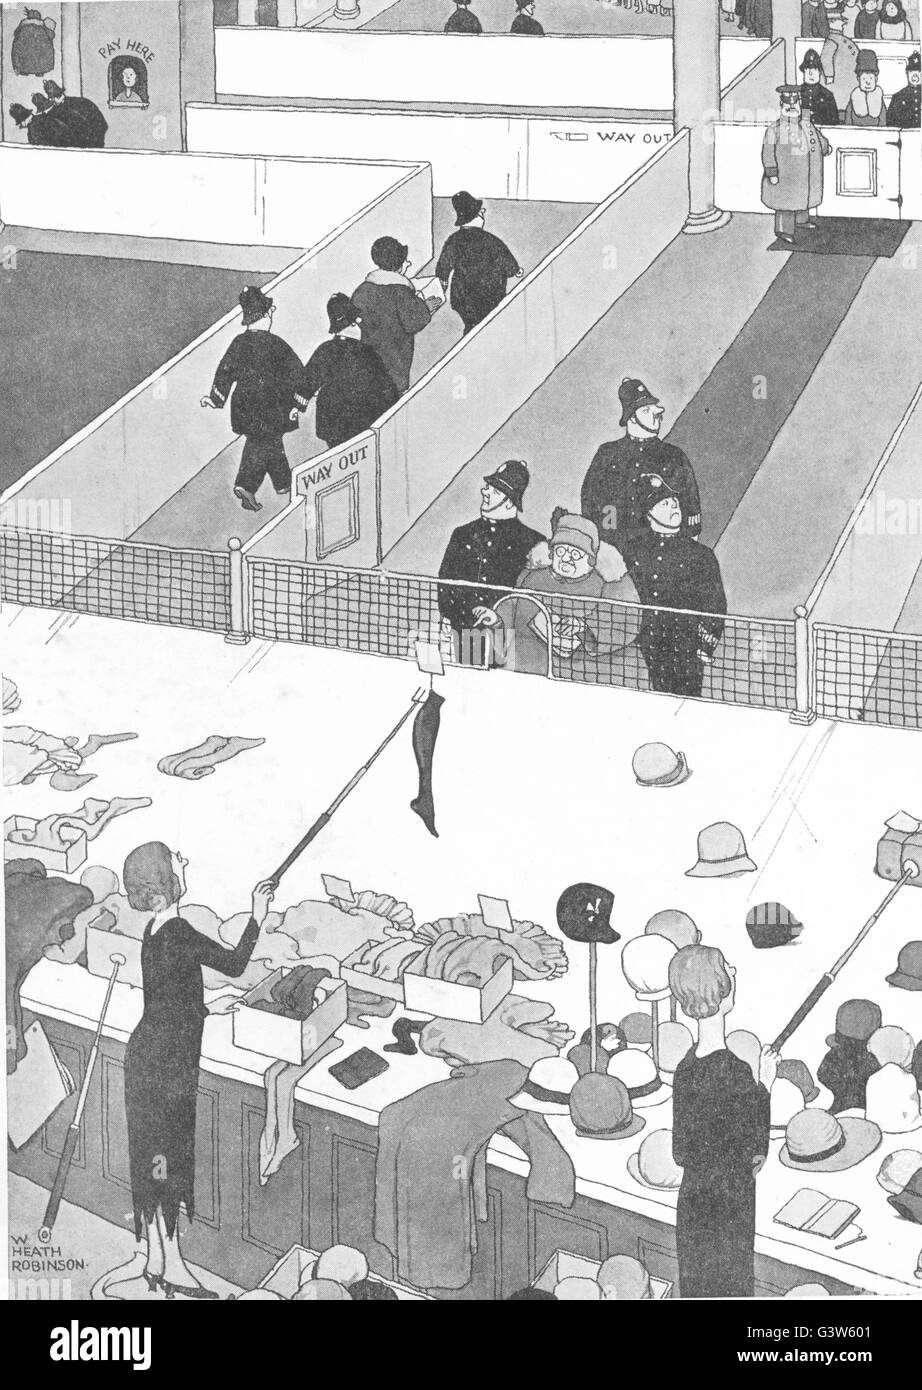 HEATH ROBINSON: 1--time method conducting sales protecting assistants, 1920 Stock Photo